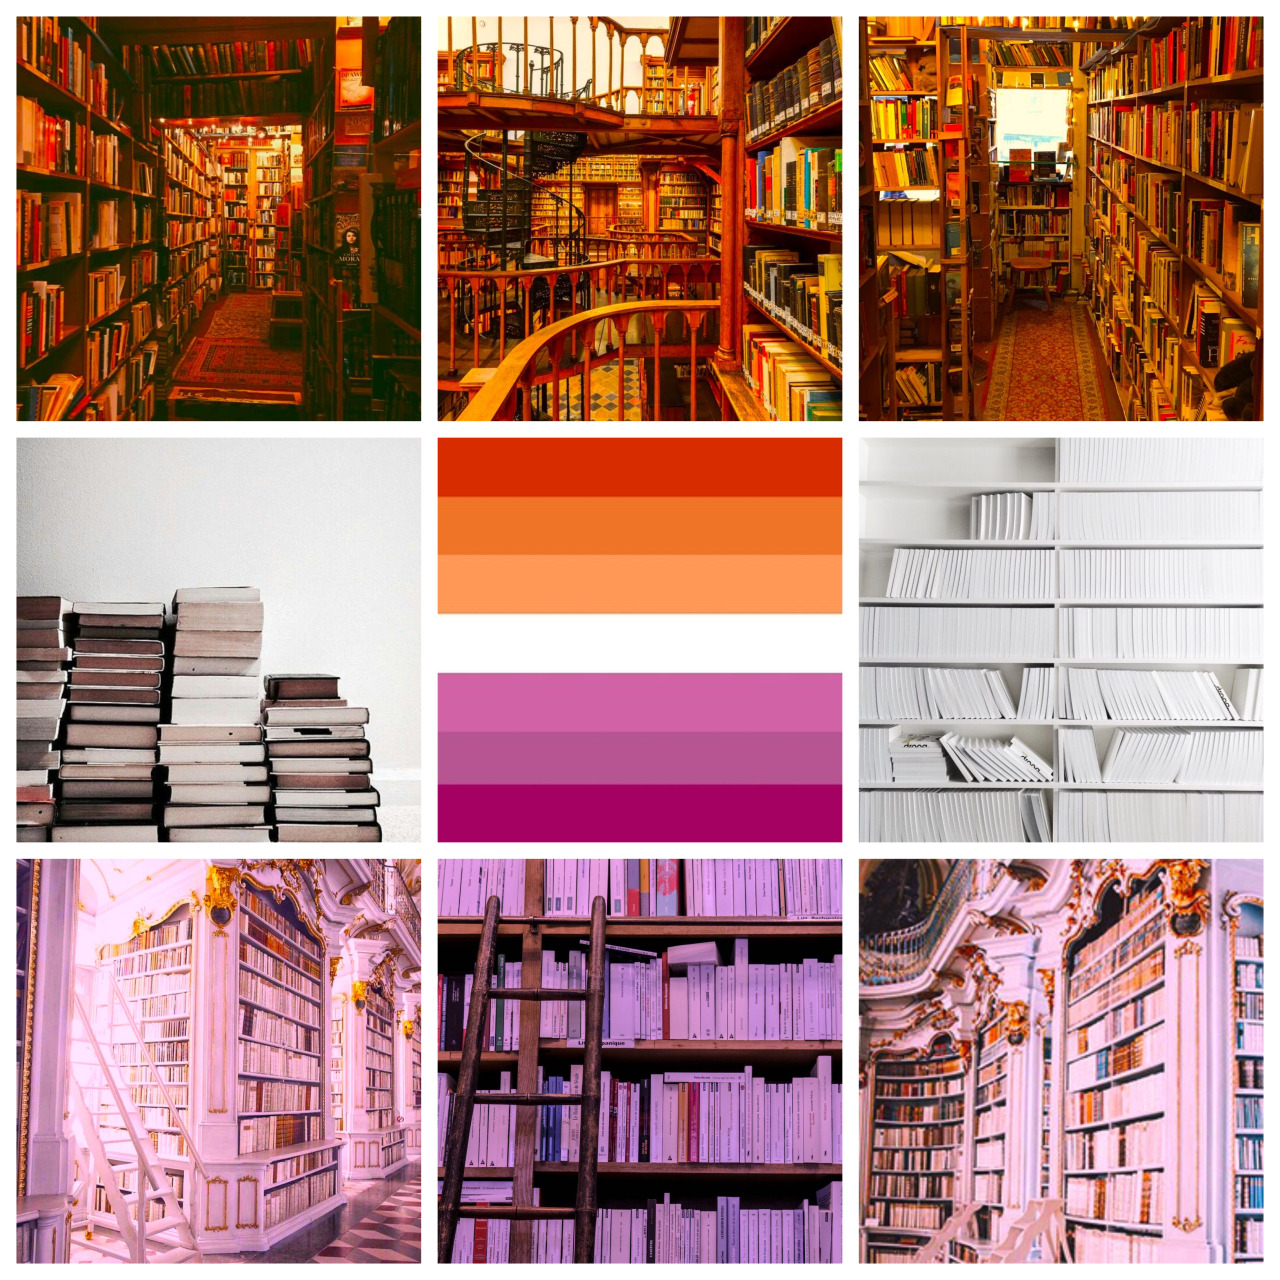 Library lesbian moodboard for @why-so-queer-dear #lgbt#lgbtq#lgbtqia#lesbian#aesthetic#moodboard#mood board#library#book#books